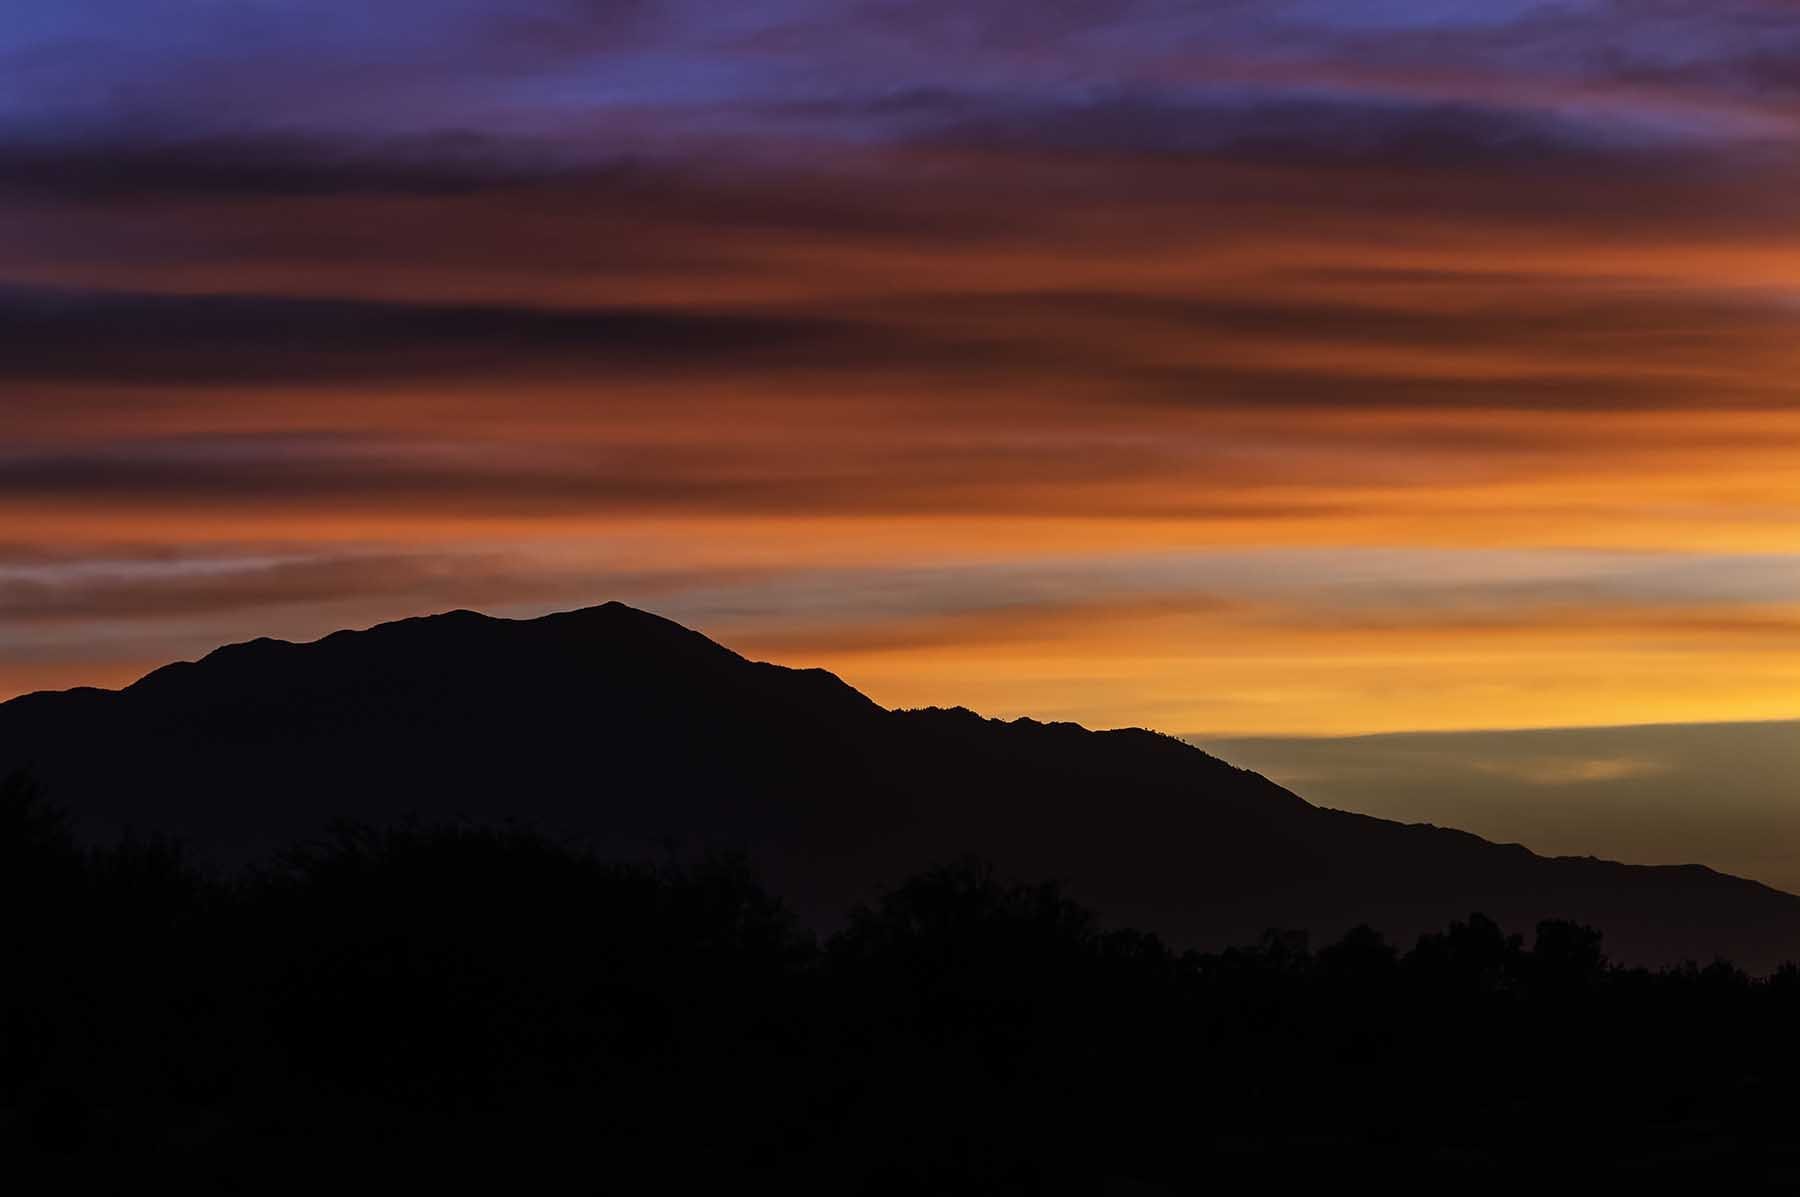 Silhouette of the San Andreas mountains at sunset